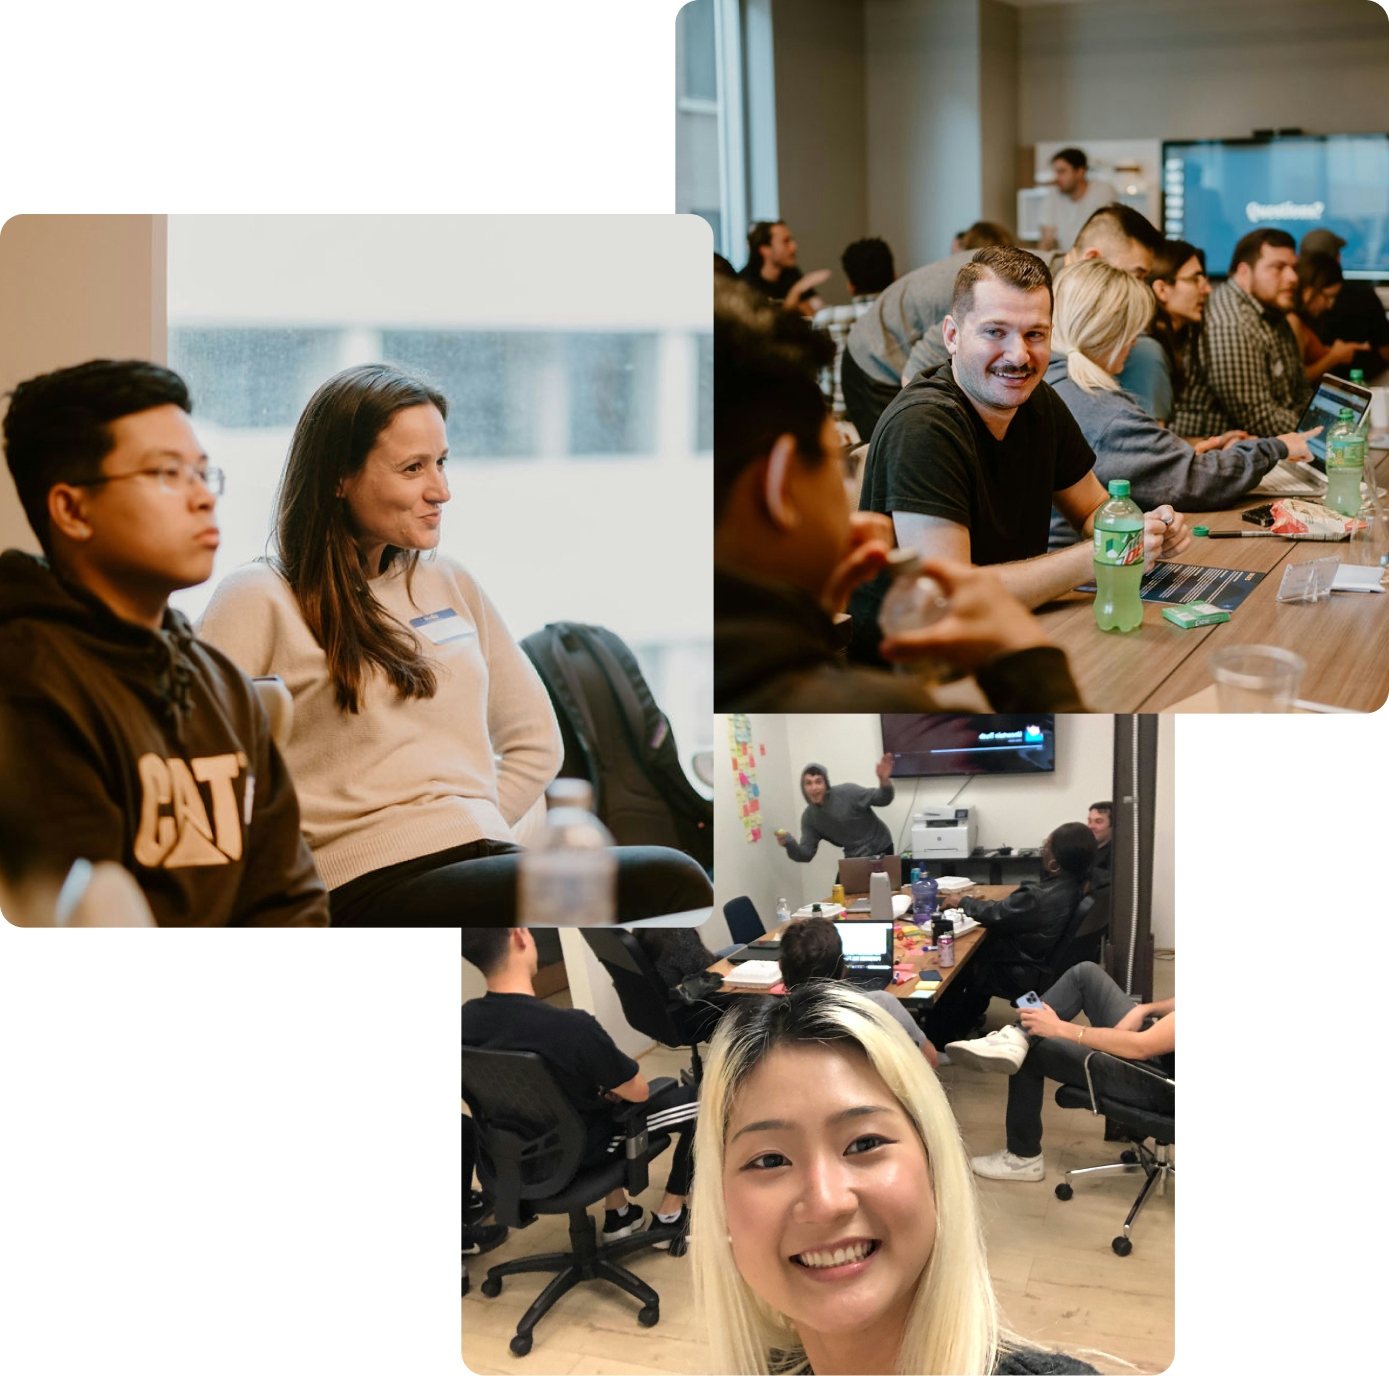 A montage of our teammates listening attentively to how they're making a difference in the real estate sector. Meet more wonderful people who want to make a difference!